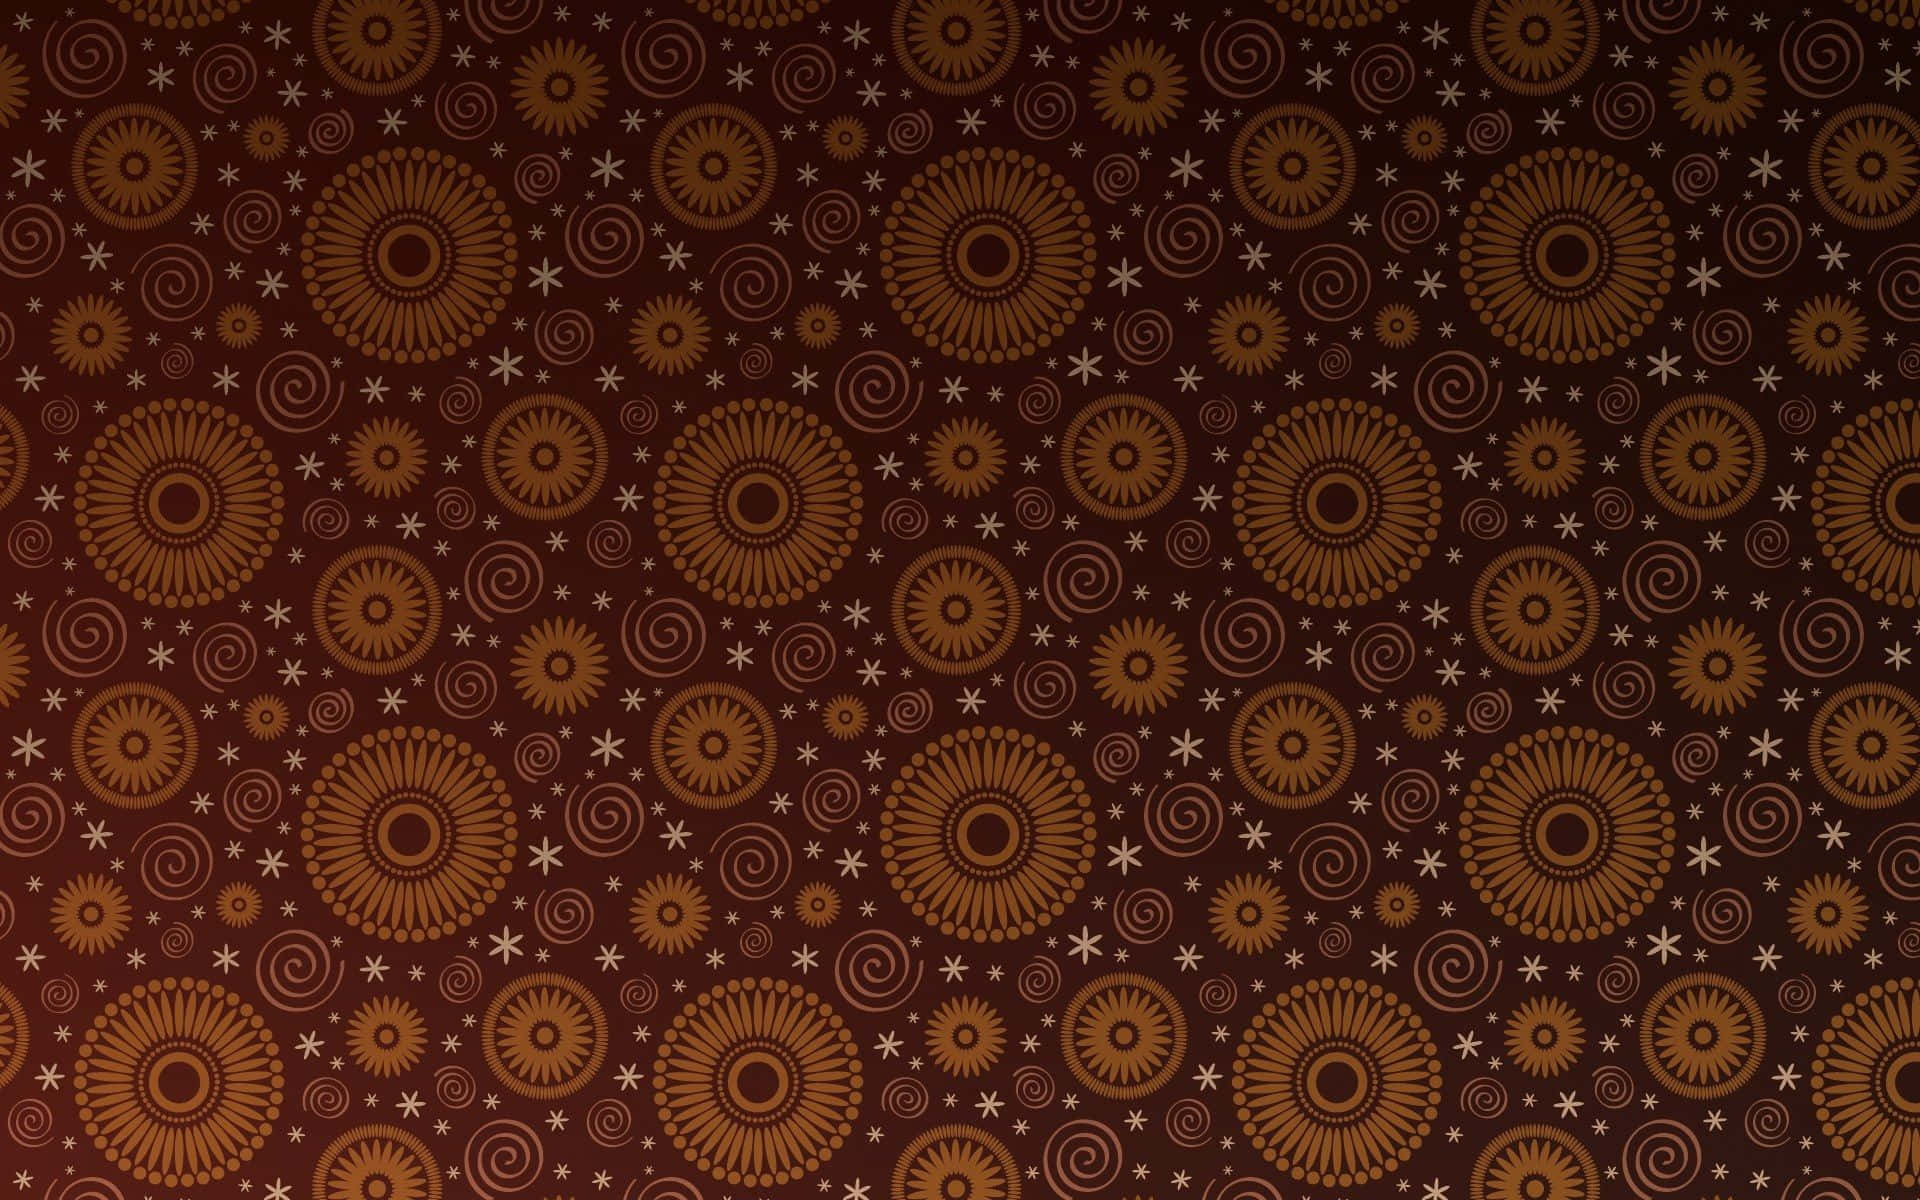 Caption: Conventional Symmetrical Circle Pattern On A Brown Wallpaper Wallpaper